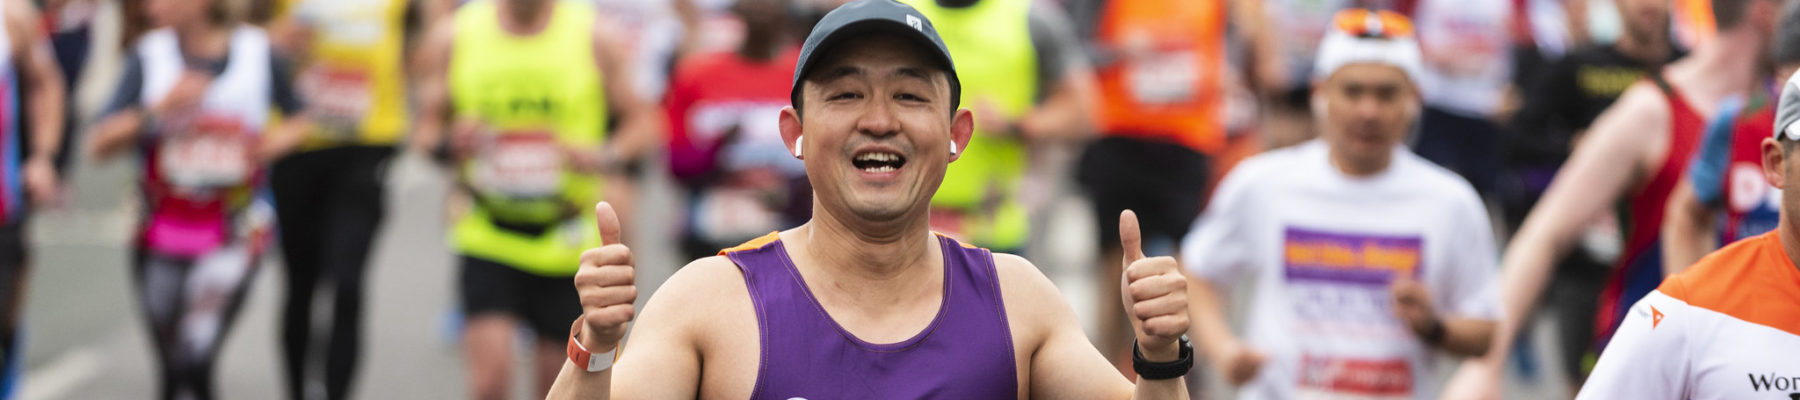 A runner in a Sense vest has his thumbs up